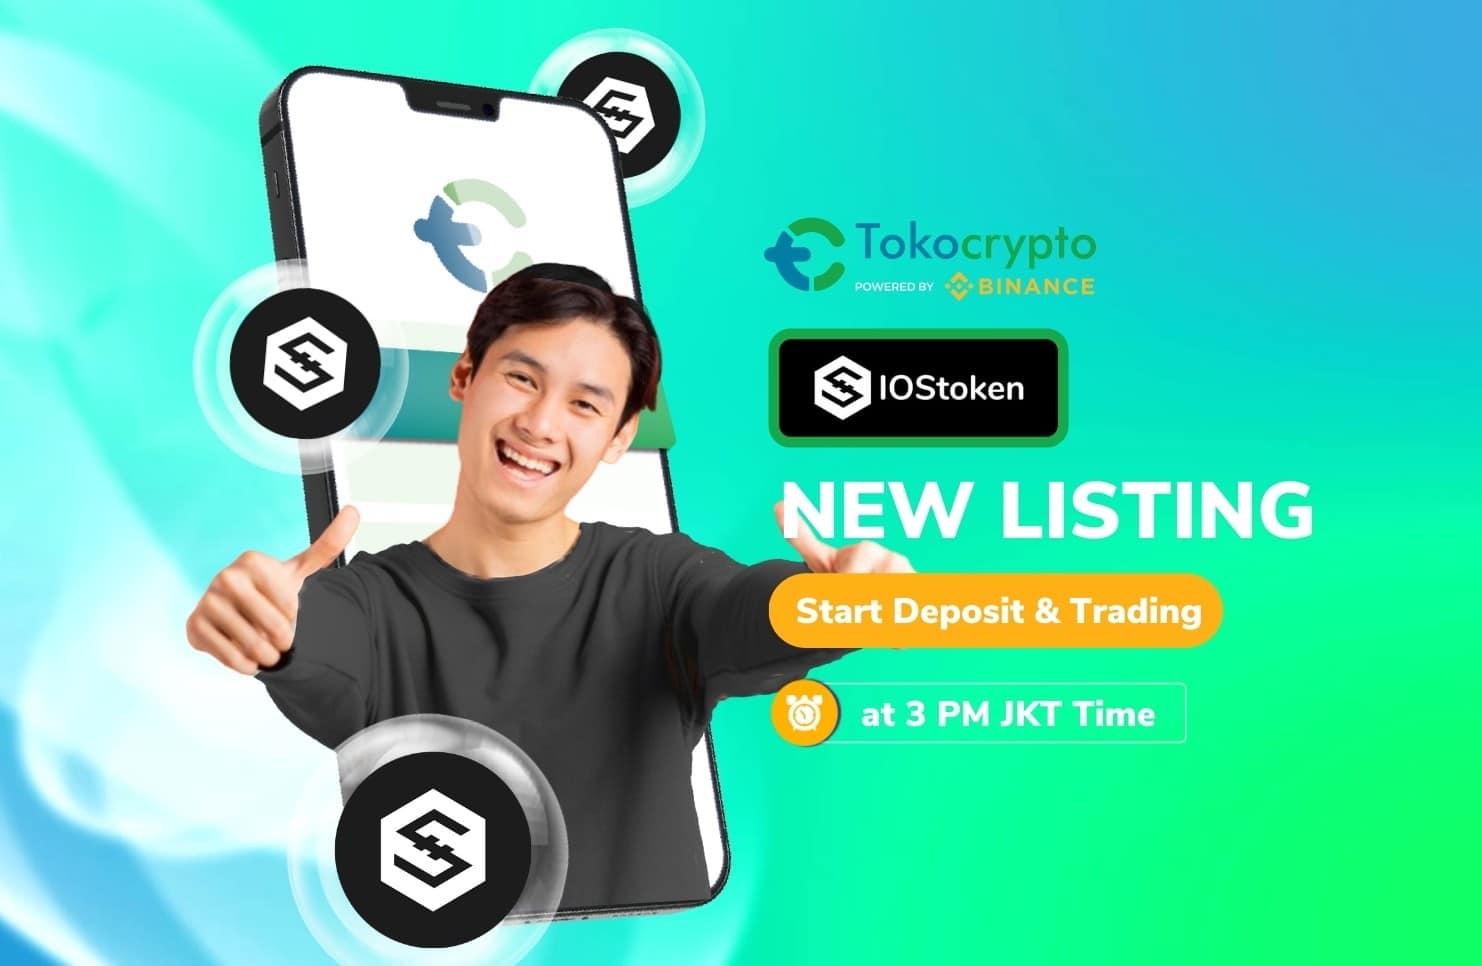 IOST (IOST) Continues to Bag Crypto Exchange Listings with Wider Adoption - 5